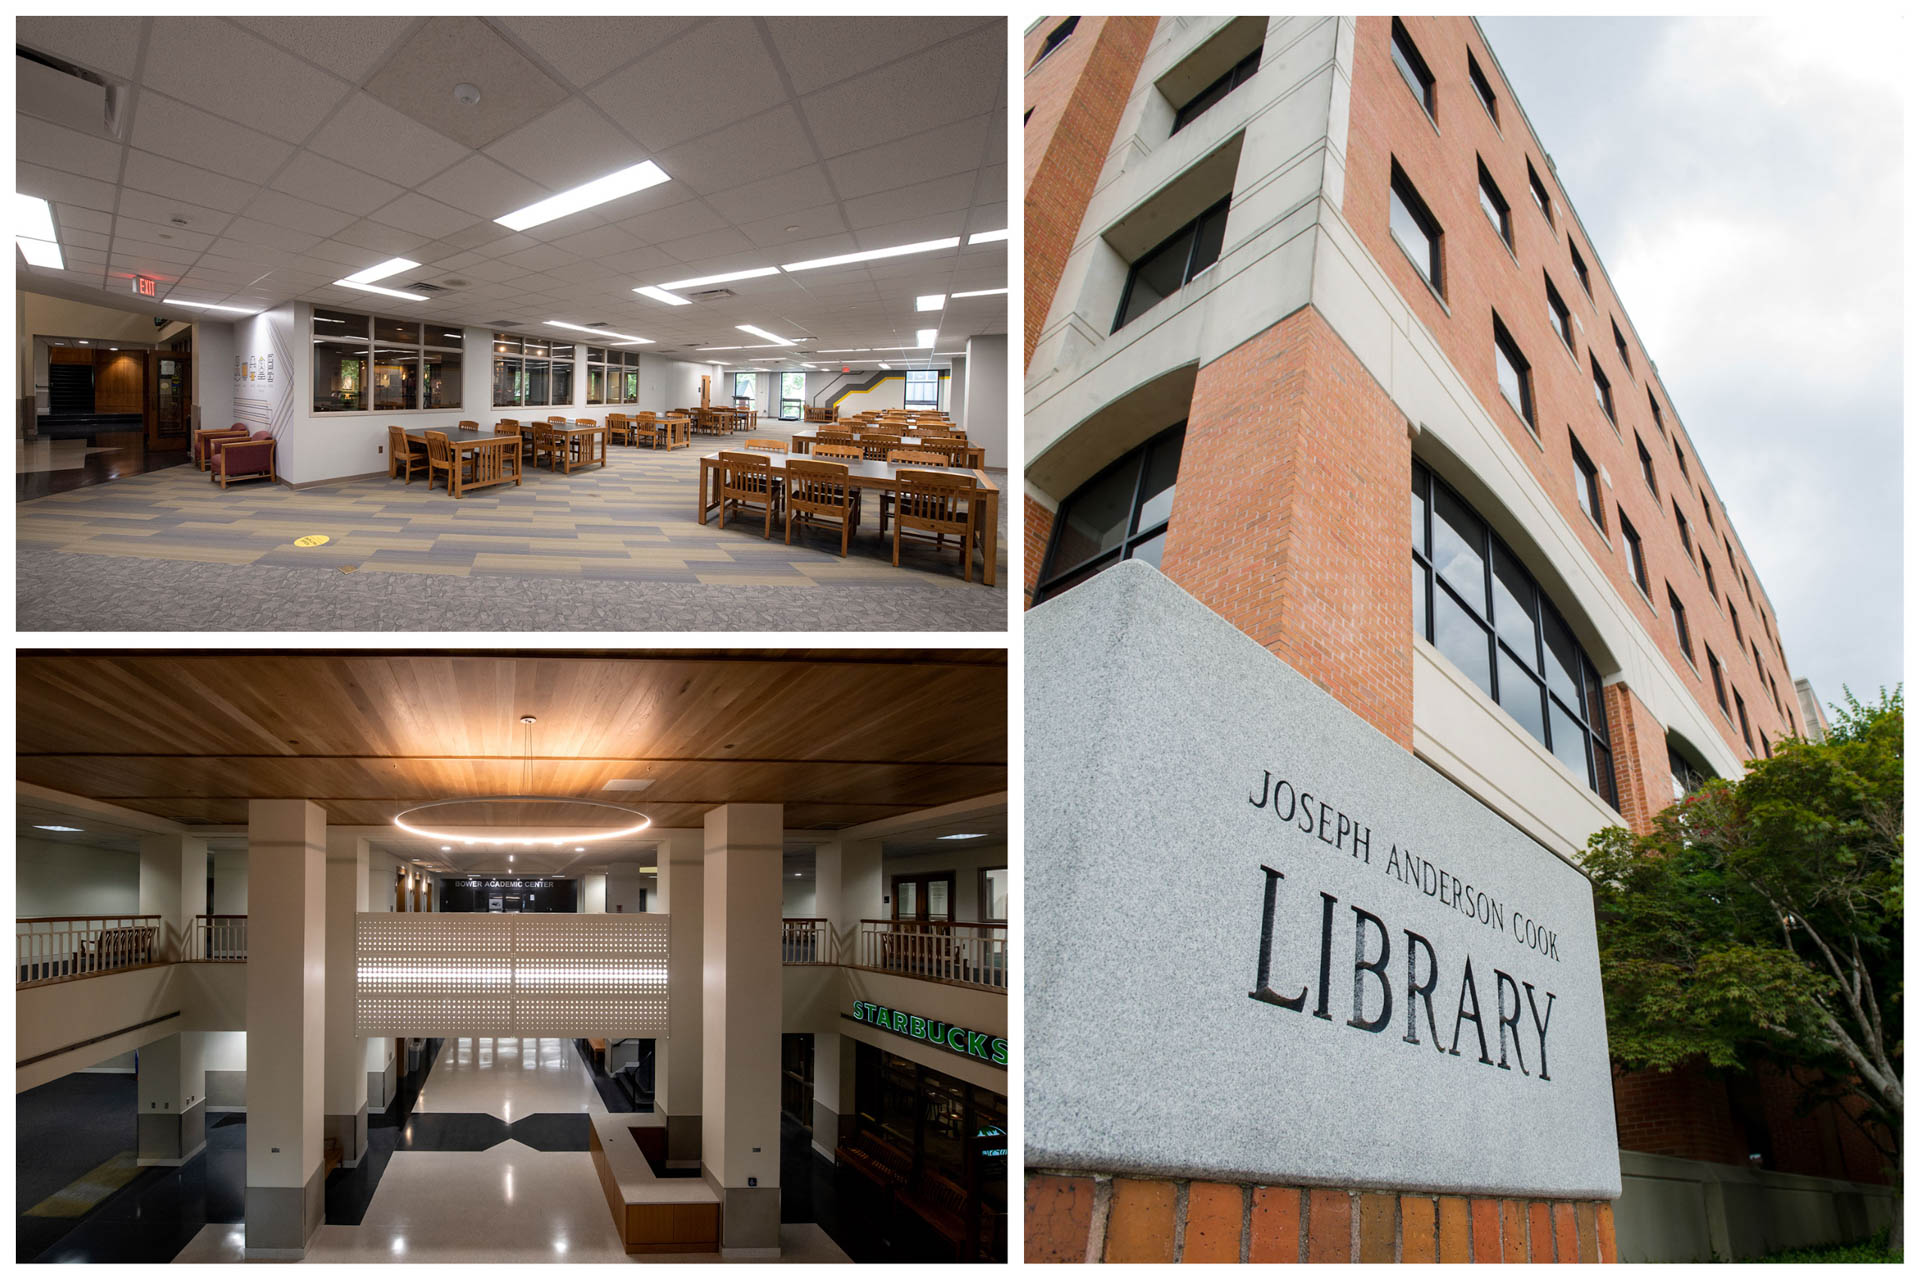 Photos of the library's renovations